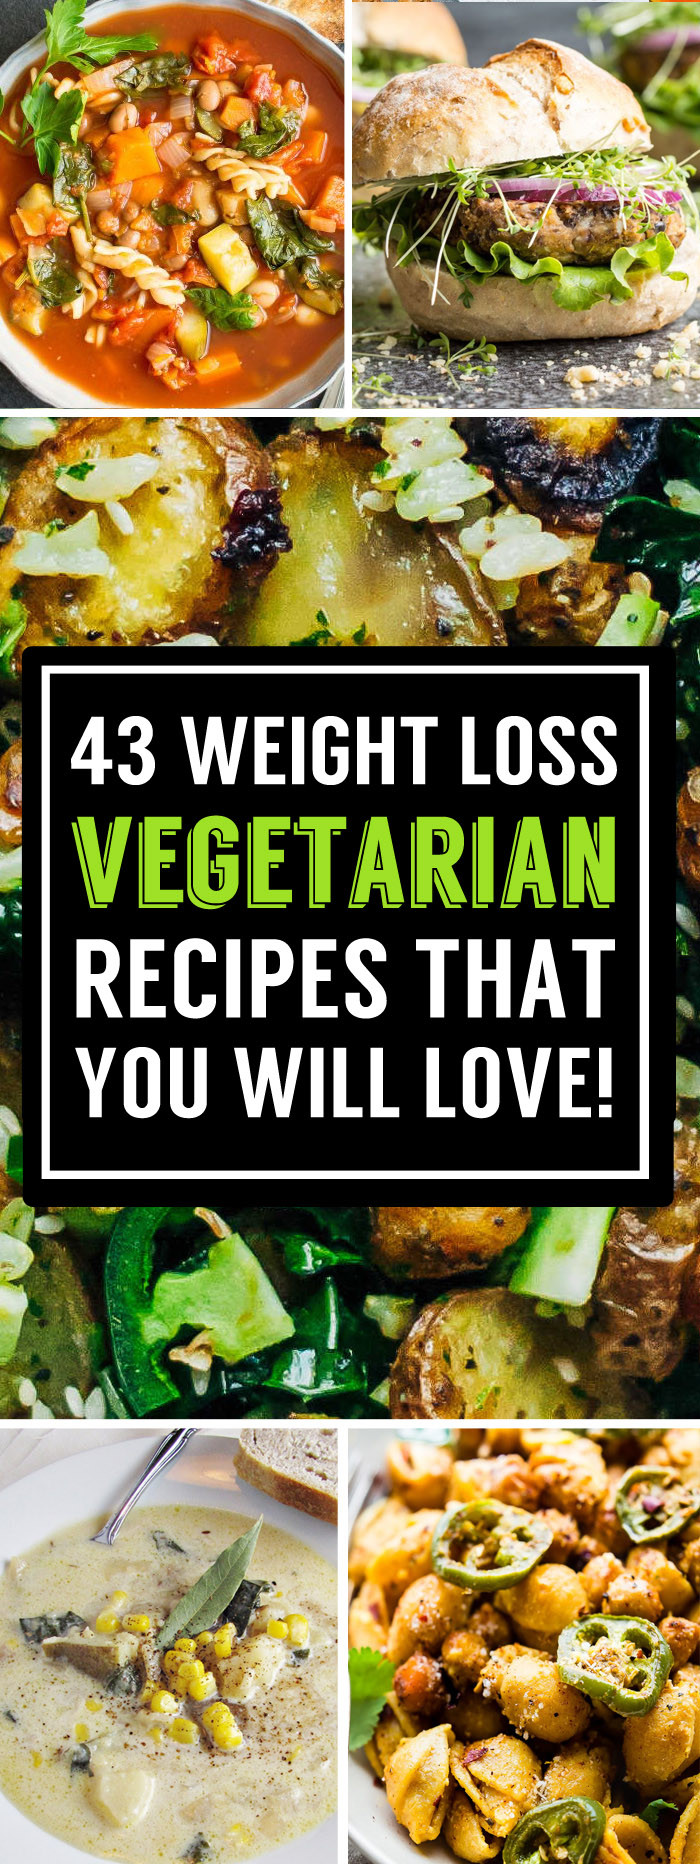 Healthy Vegetarian Recipes For Weight Loss
 43 Delicious Ve arian Recipes That Can Help Boost Your